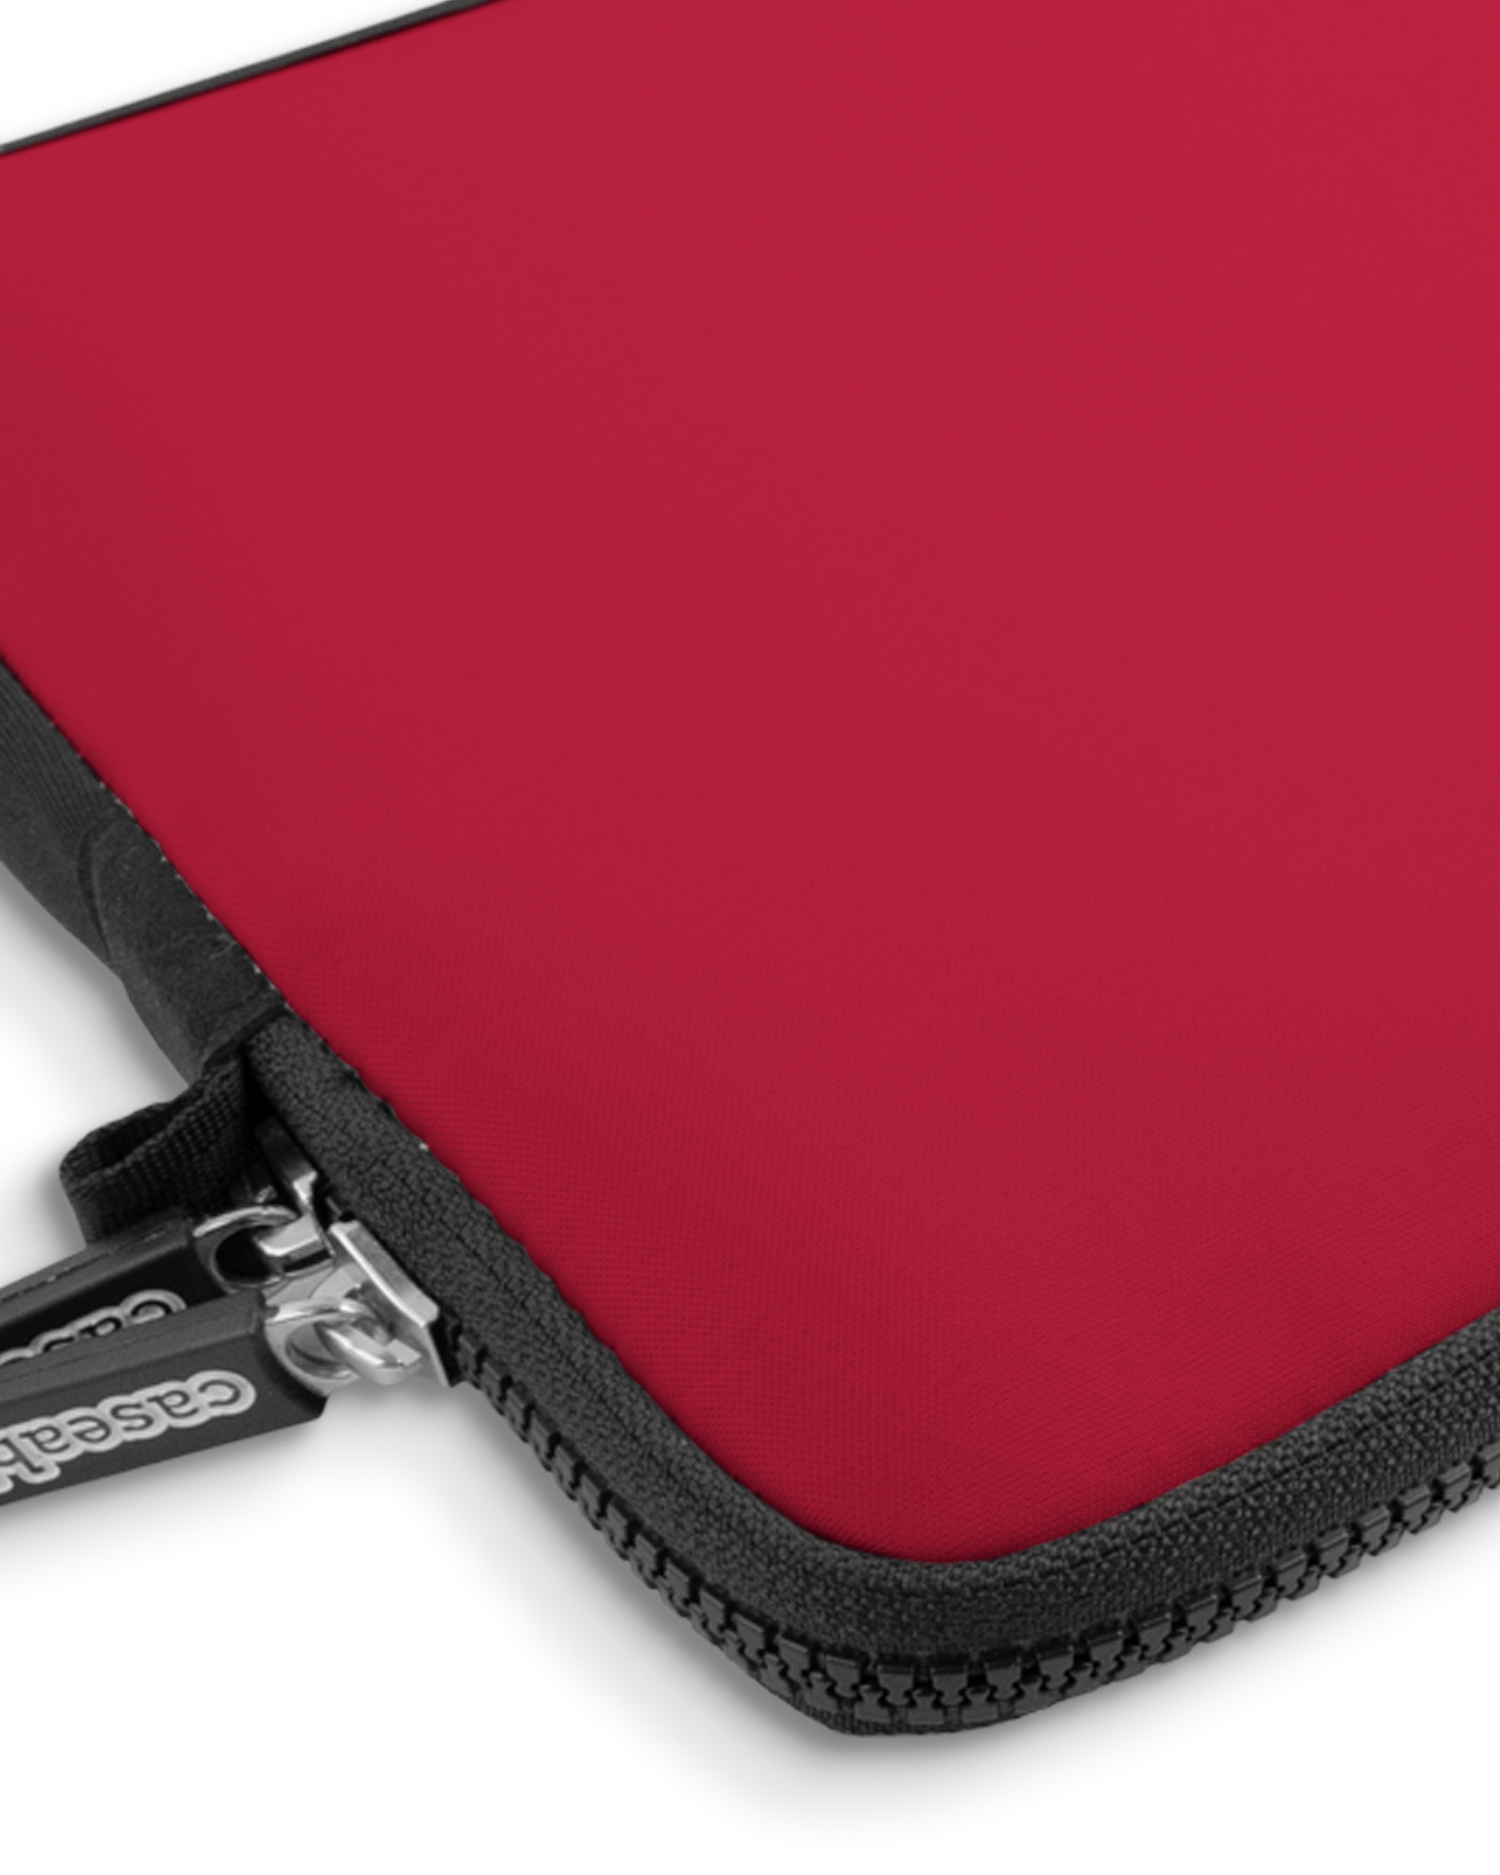 RED Premium Laptop Bag 13 inch with device inside